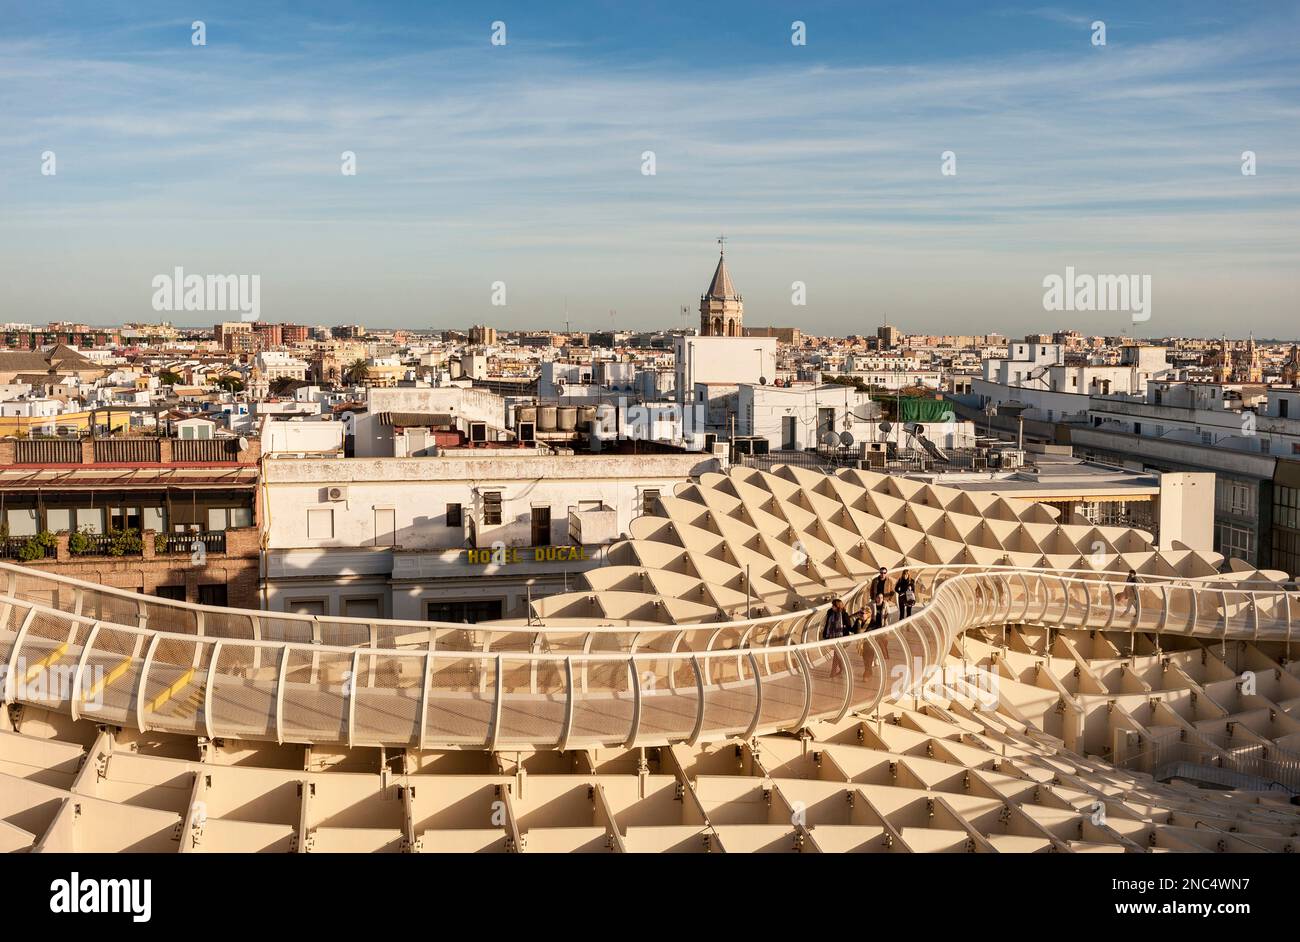 Seville-Andalusia-Spain, December 12. 2019: Panoramic view of the city Seville and Metropolitan Parasol building, Stock Photo